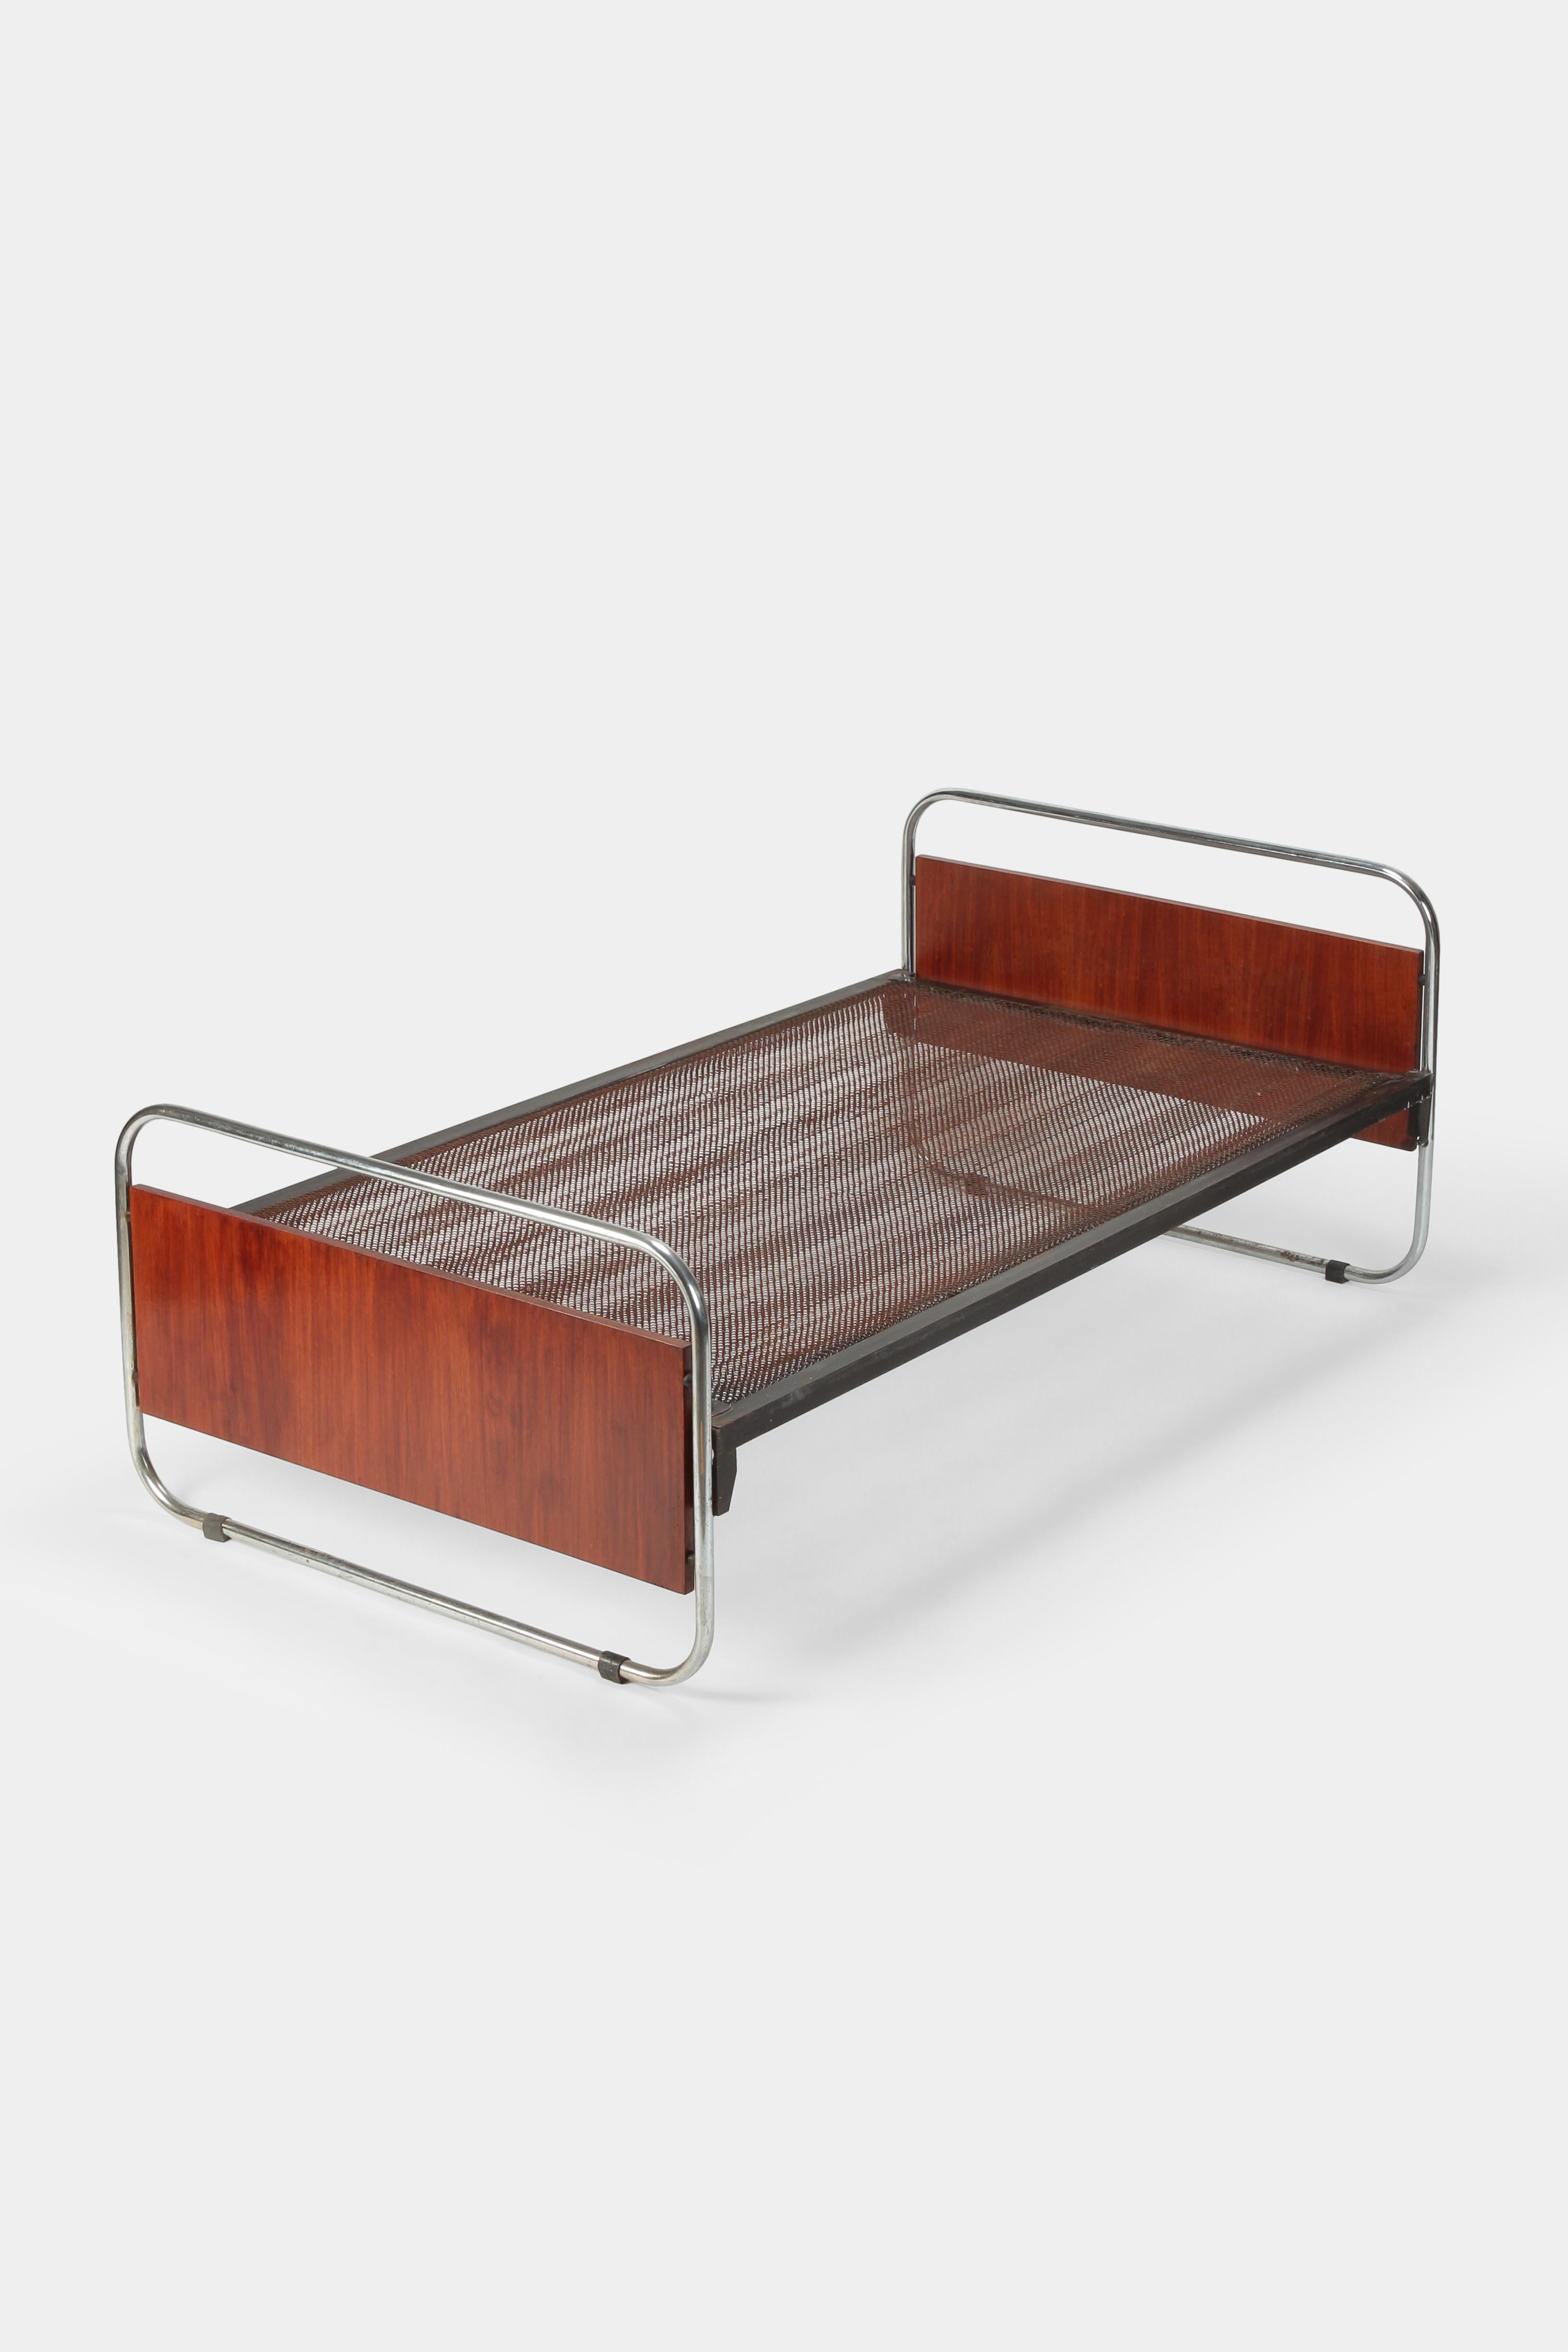 Unique Bauhaus bed manufactured in the 1930s in Czech. The sides are made of two teak wood veneered boards surrounded by chrome steel frames. Attached to them is a black lacquered grid with striking patina.